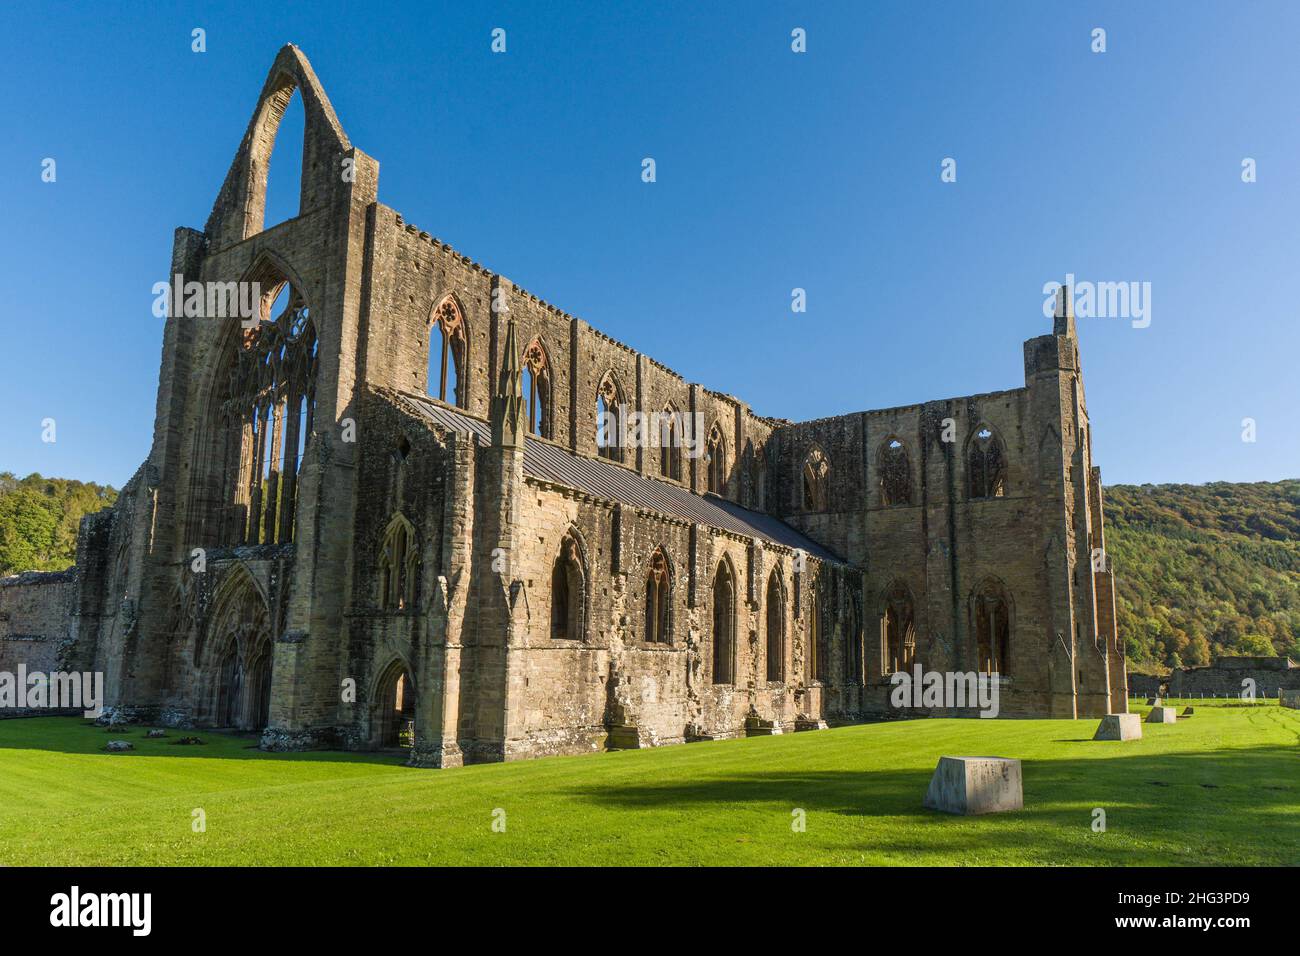 Tintern abbey still standing almost 500 years after the reign of King Henry Vlll Reformation and the dissolution of the church. Monmouthshire Wales U Stock Photo